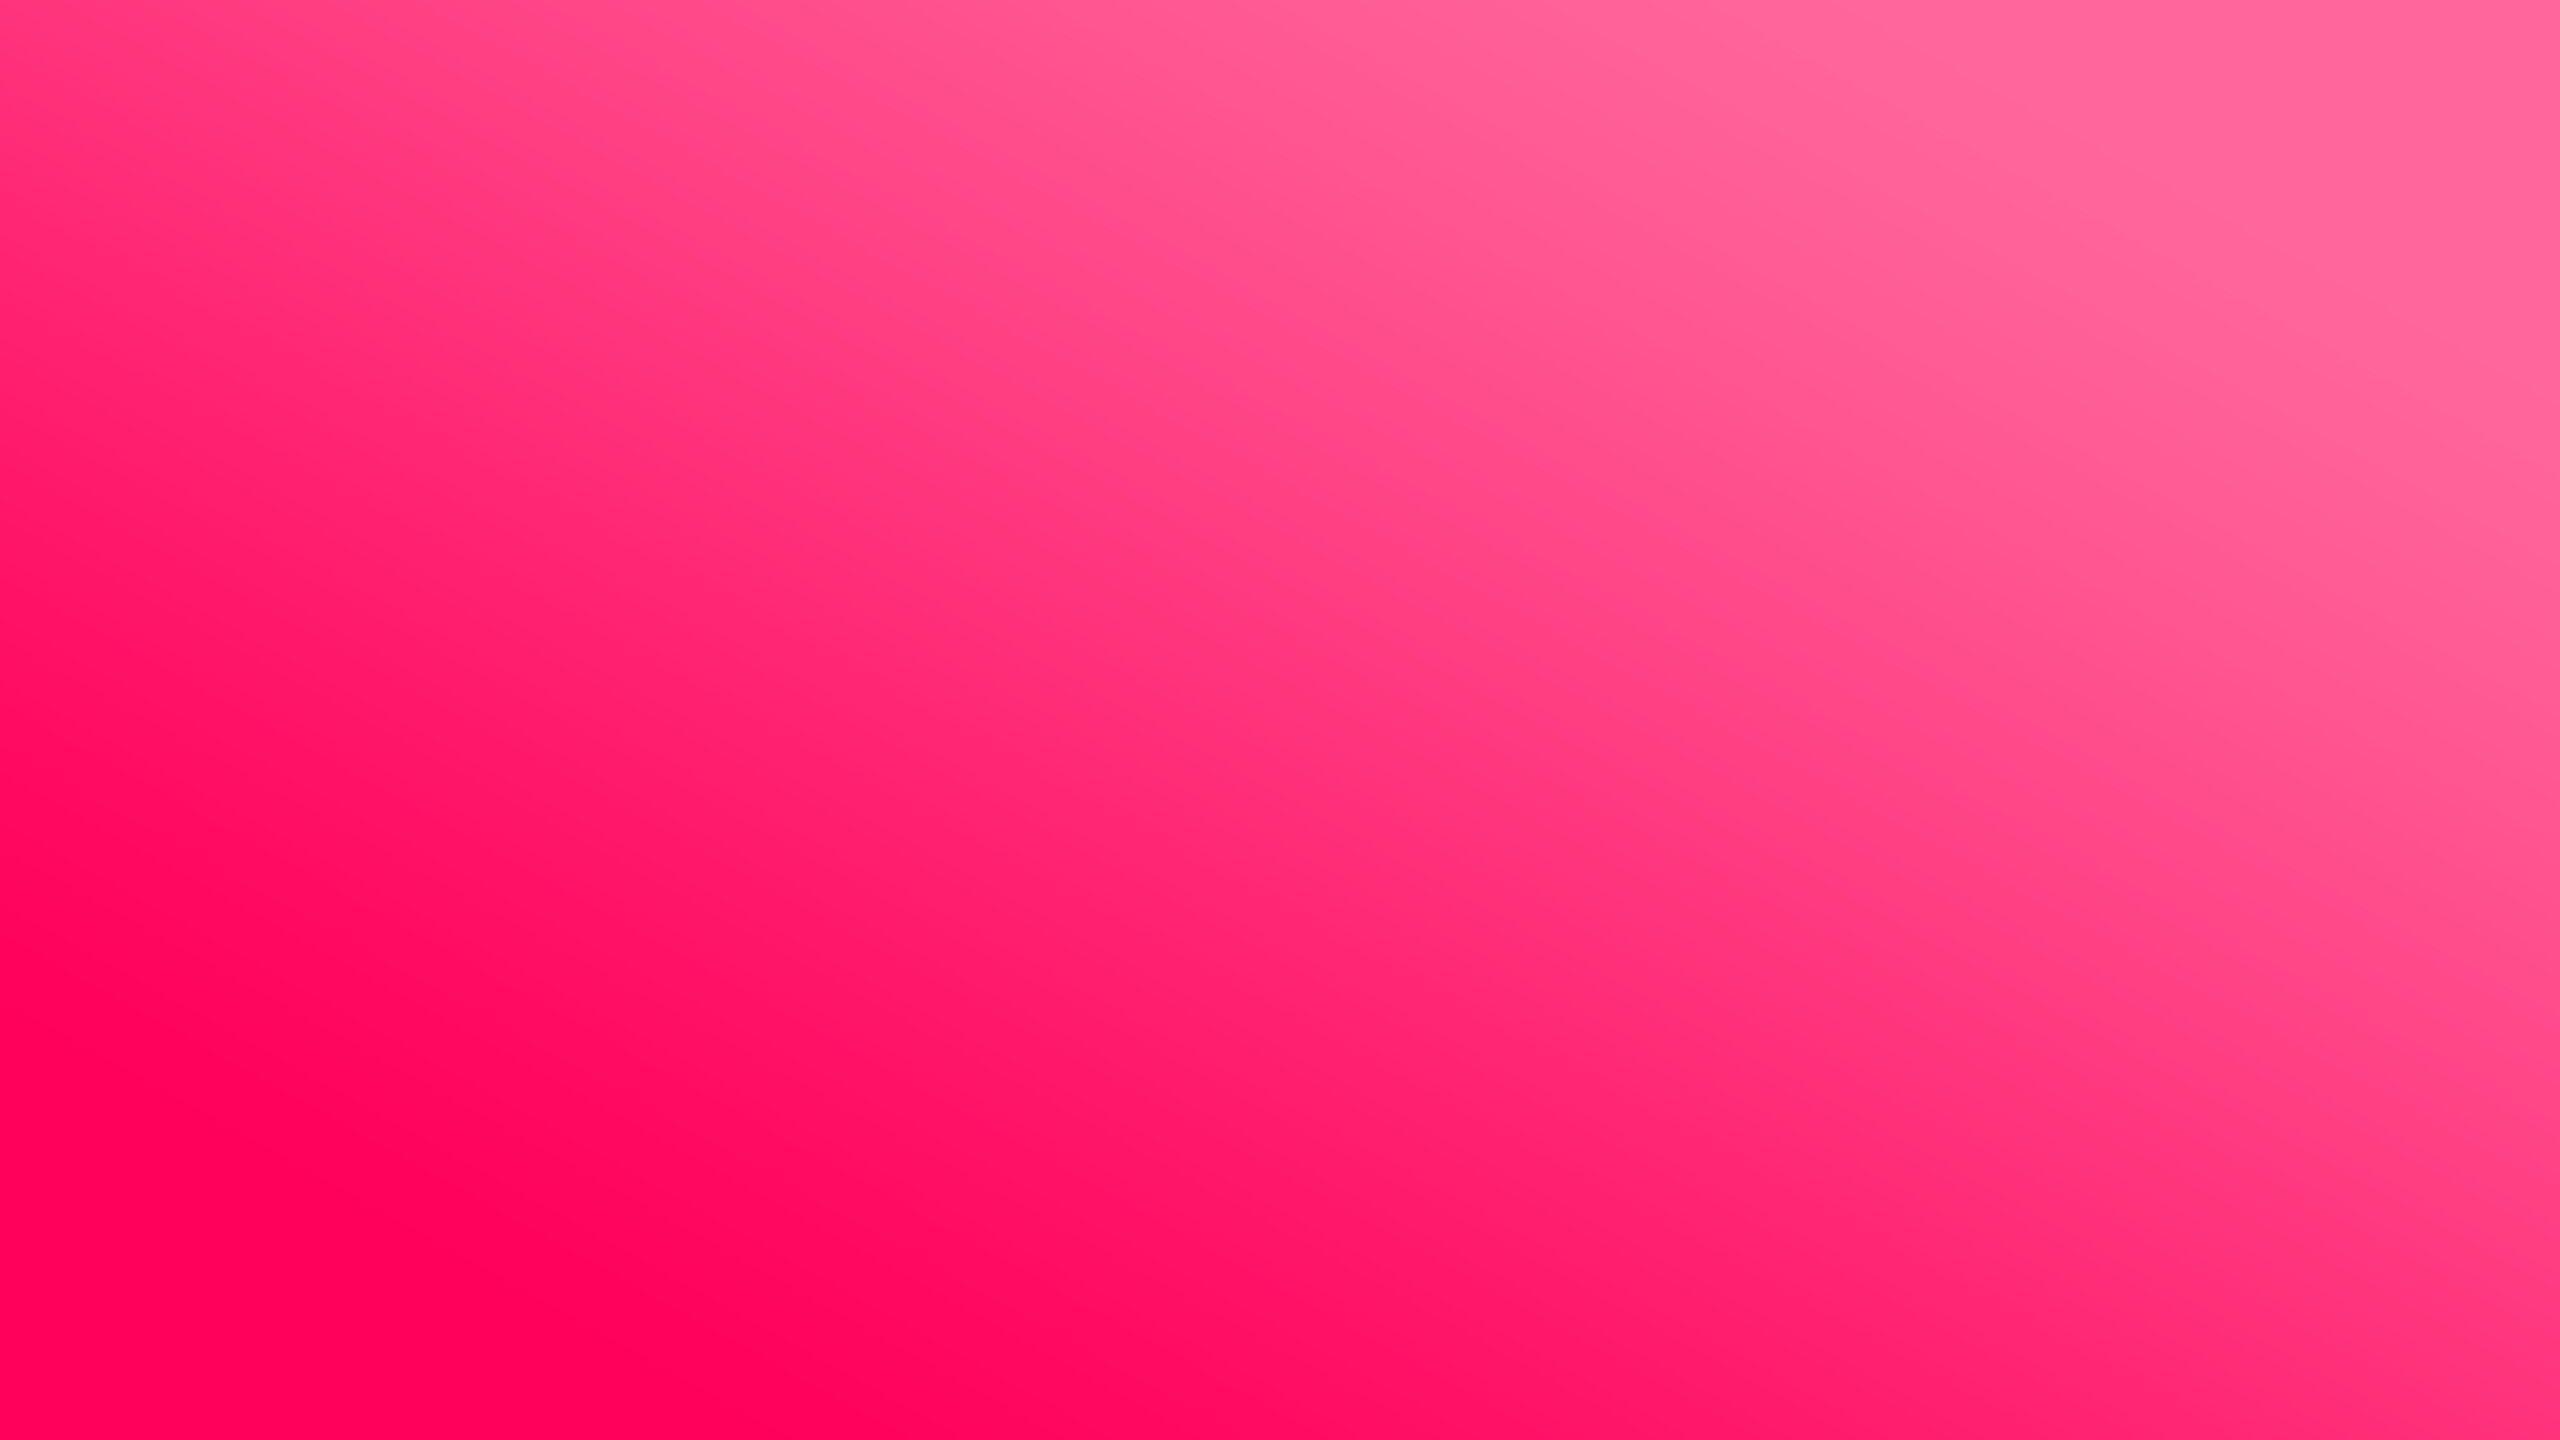 Solid Bright Pink Background Image & Picture